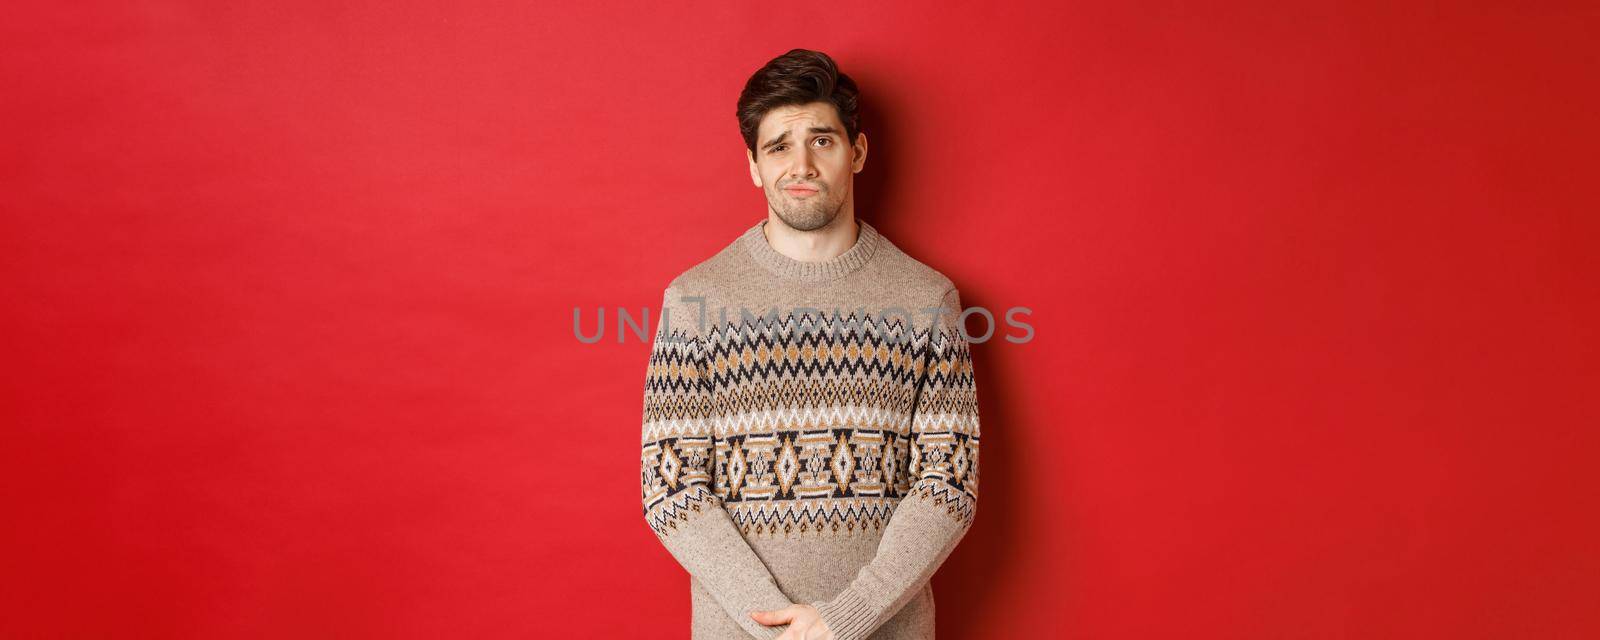 Portrait of gloomy and sad caucasian man in christmas sweater, frowning and pouting indecisive, having bad new year, standing over red background.